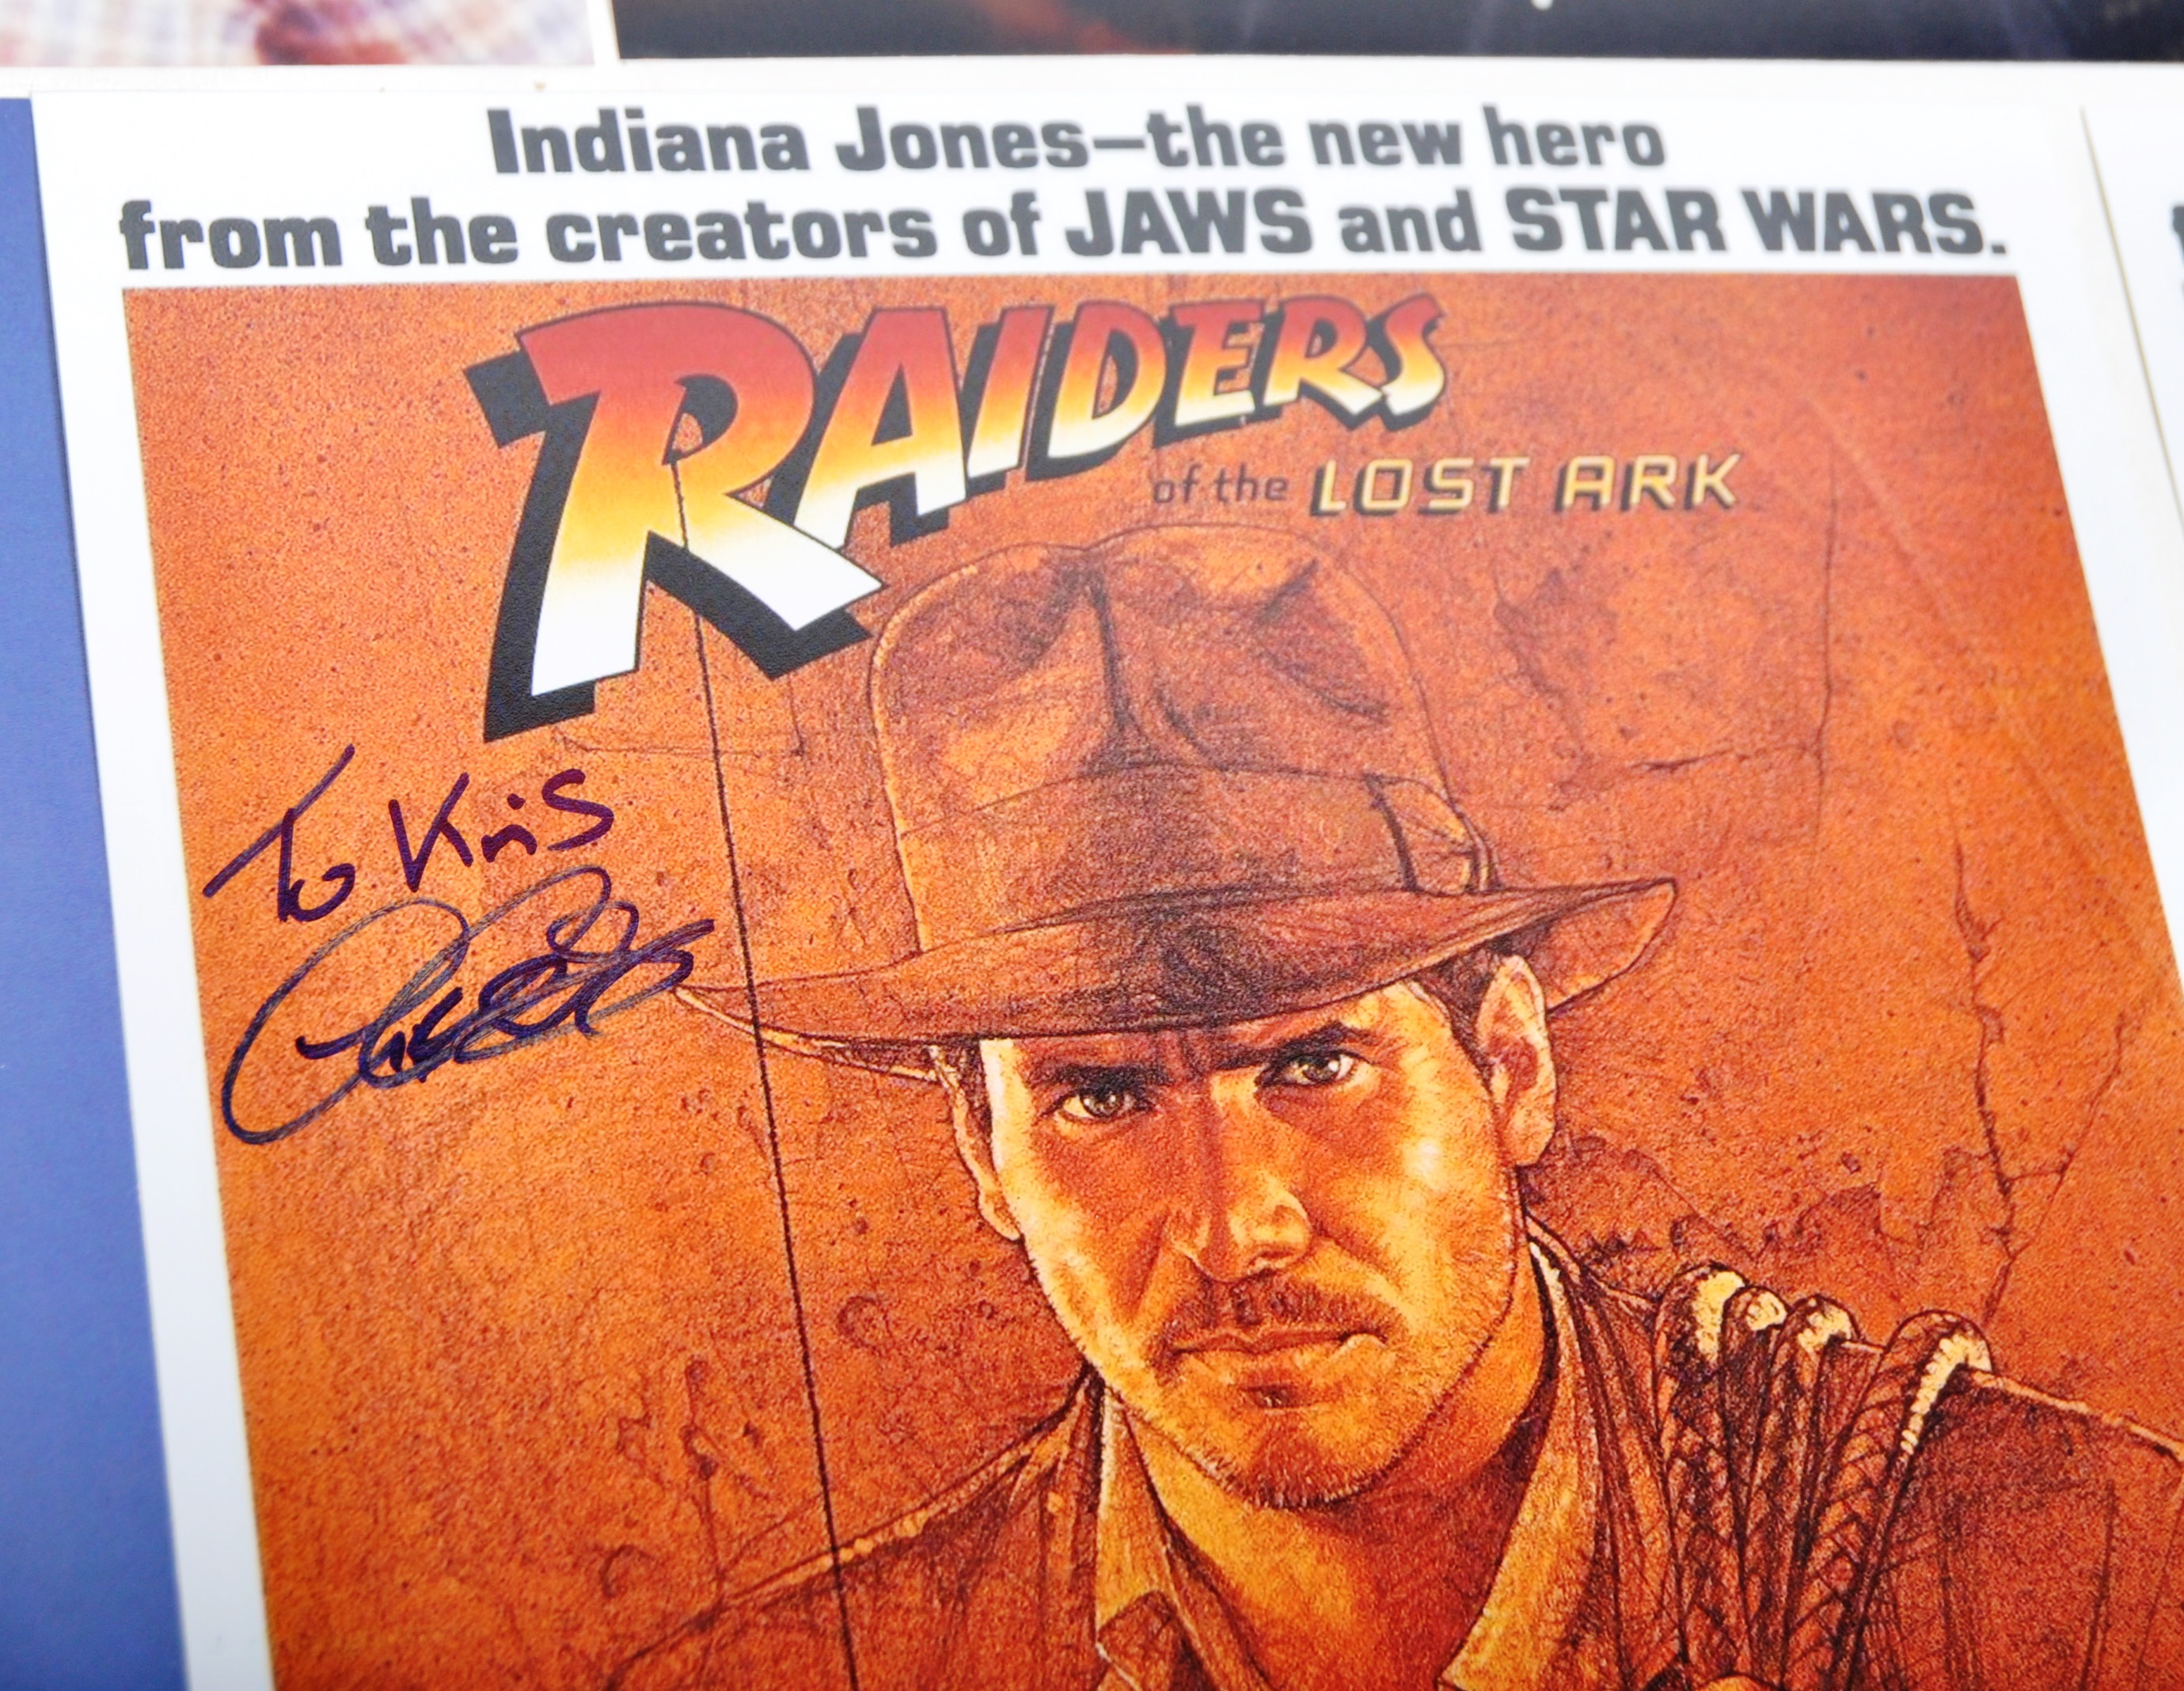 INDIANA JONES - RAIDERS - COLLECTION OF SIGNED 8X10" PHOTOS - Image 5 of 11